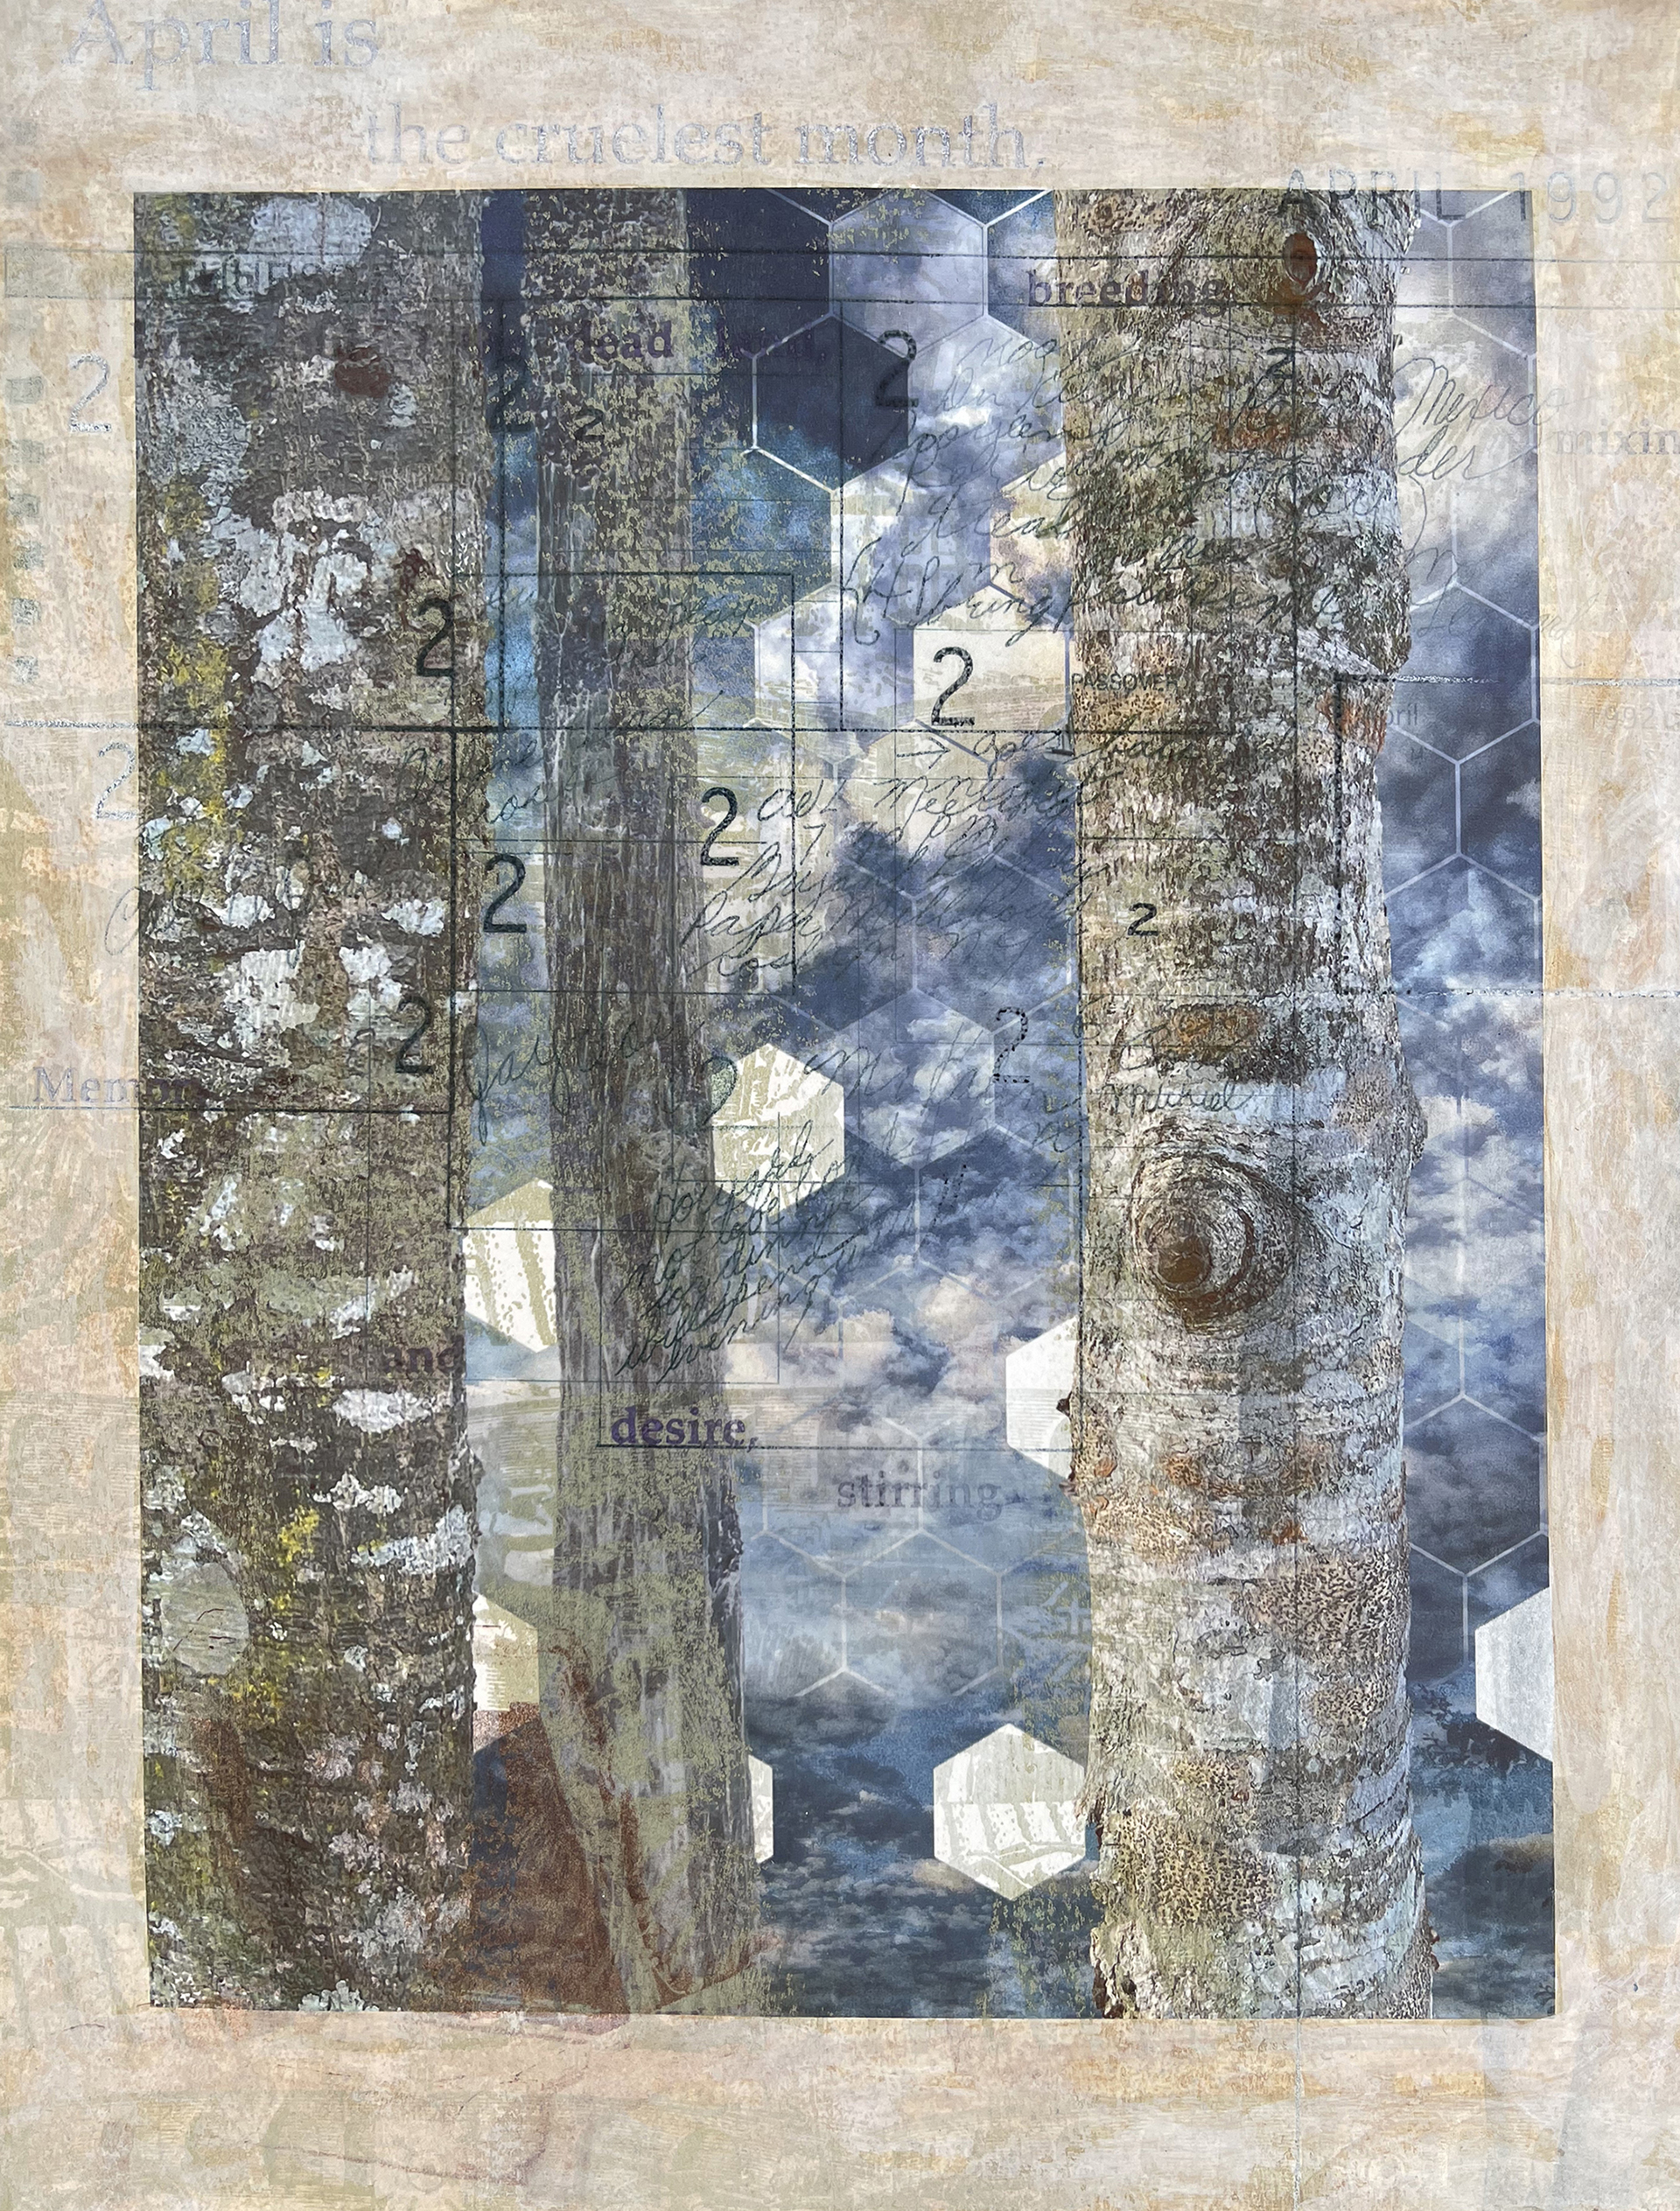 Memory's Persistence (Cruelest Month); lithograph, intaglio, acrylic, digital print; 11” x 8.5”; 2021 Photo layers of sky and trees composed of hexagons, and text create a dense visual space.